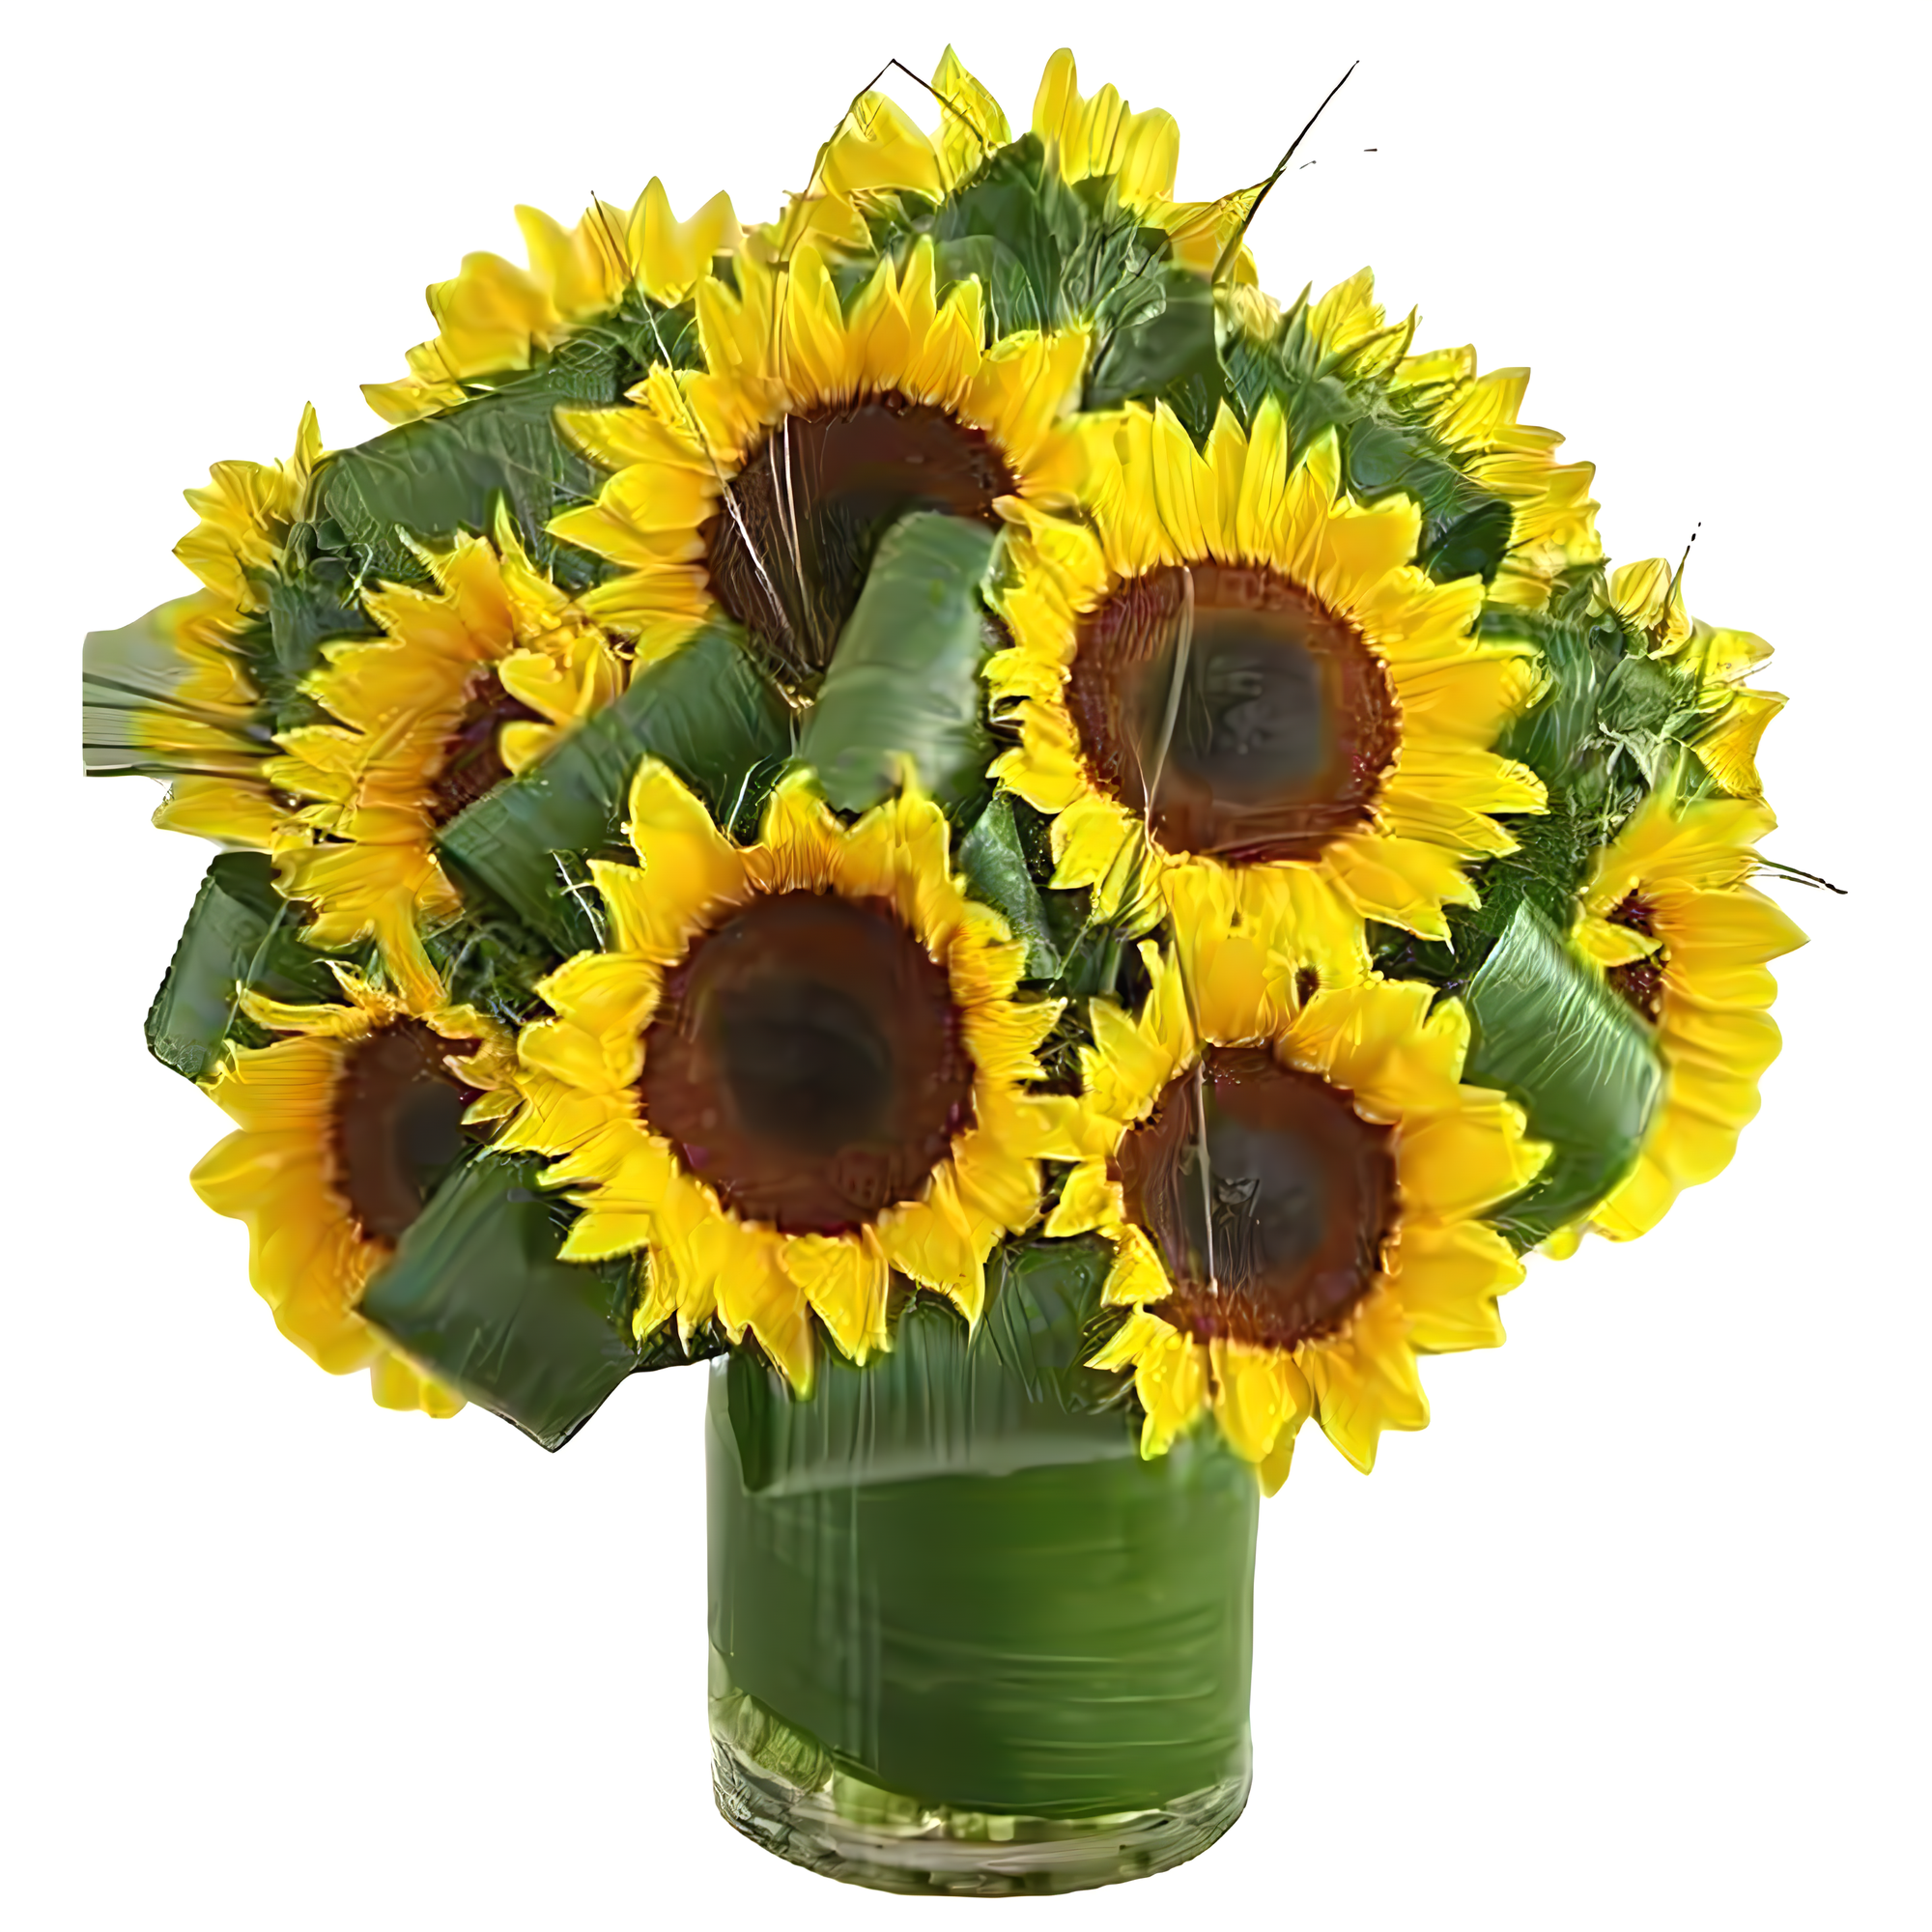 Sun-Sational Sunflowers - Products > Corporate Gifts